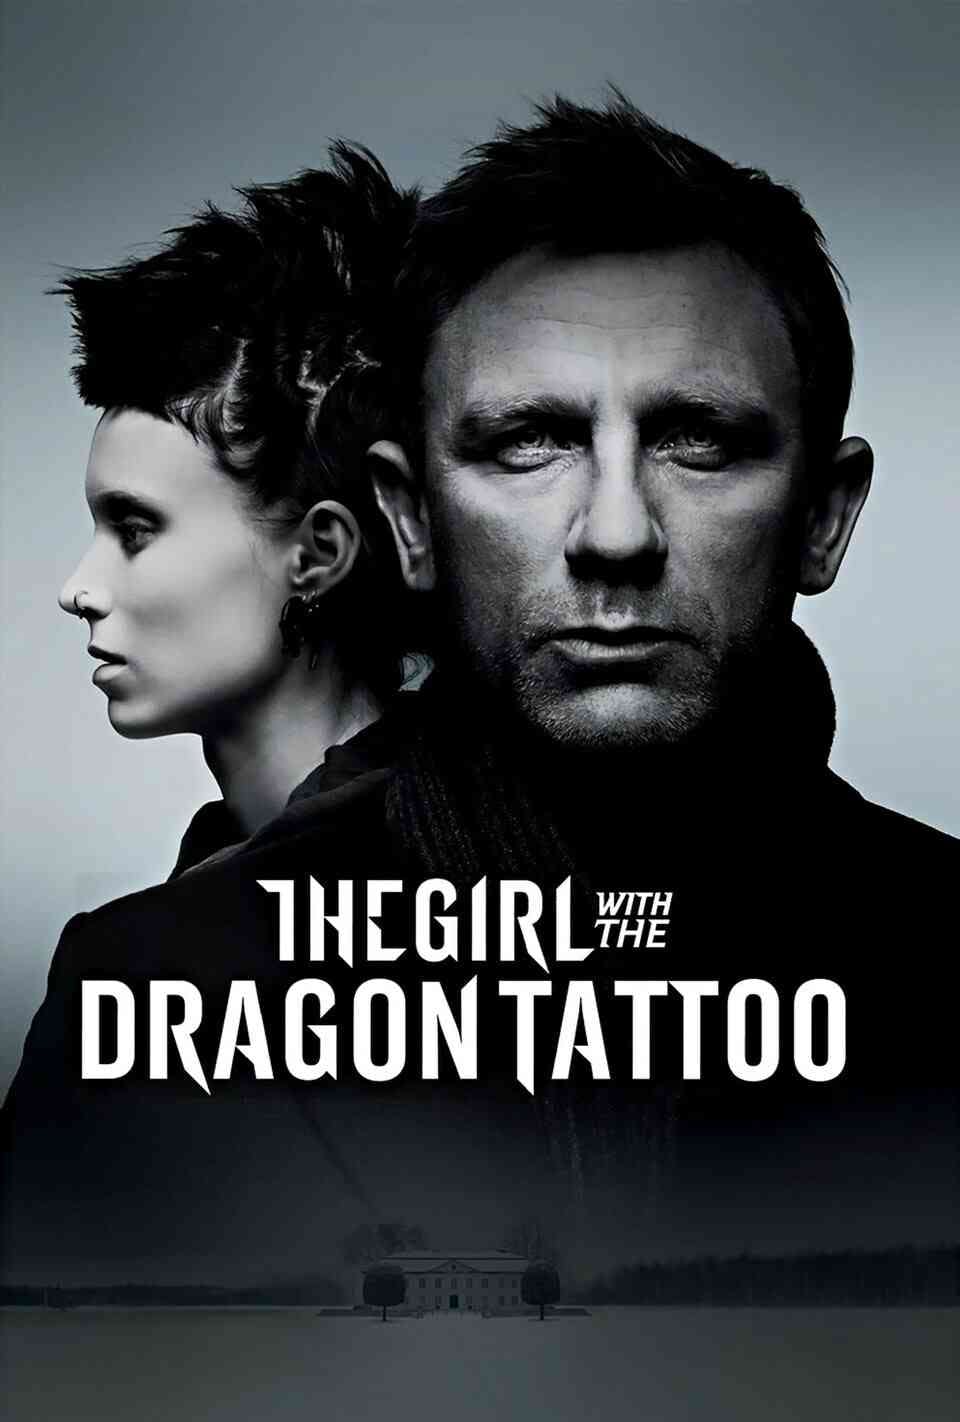 Read The Girl with the Dragon Tattoo screenplay (poster)